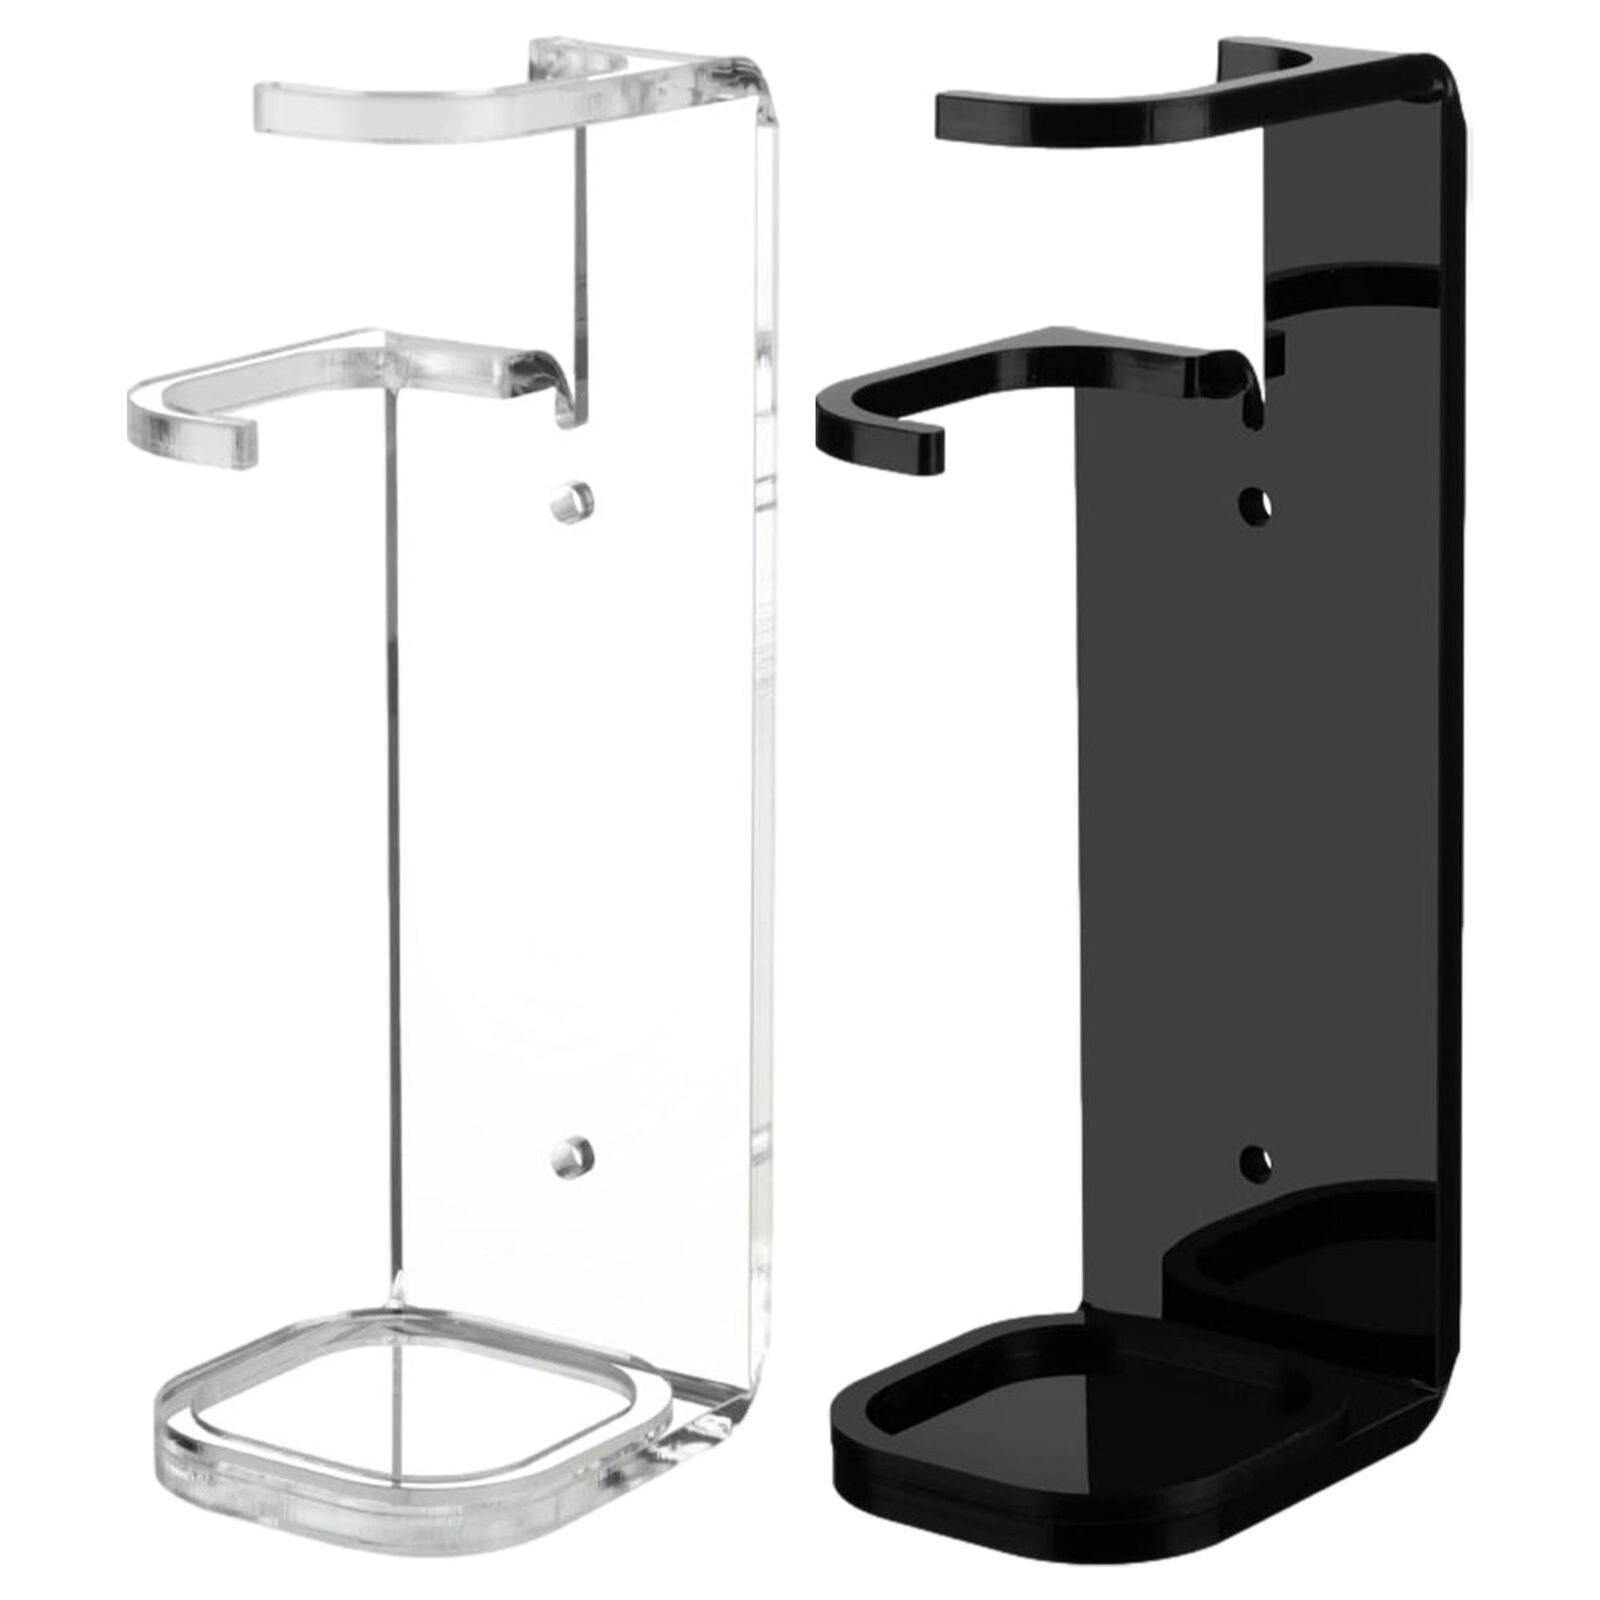 Acrylic Lightsaber Wall Mount        Stand Holder Decorative        Display Rack